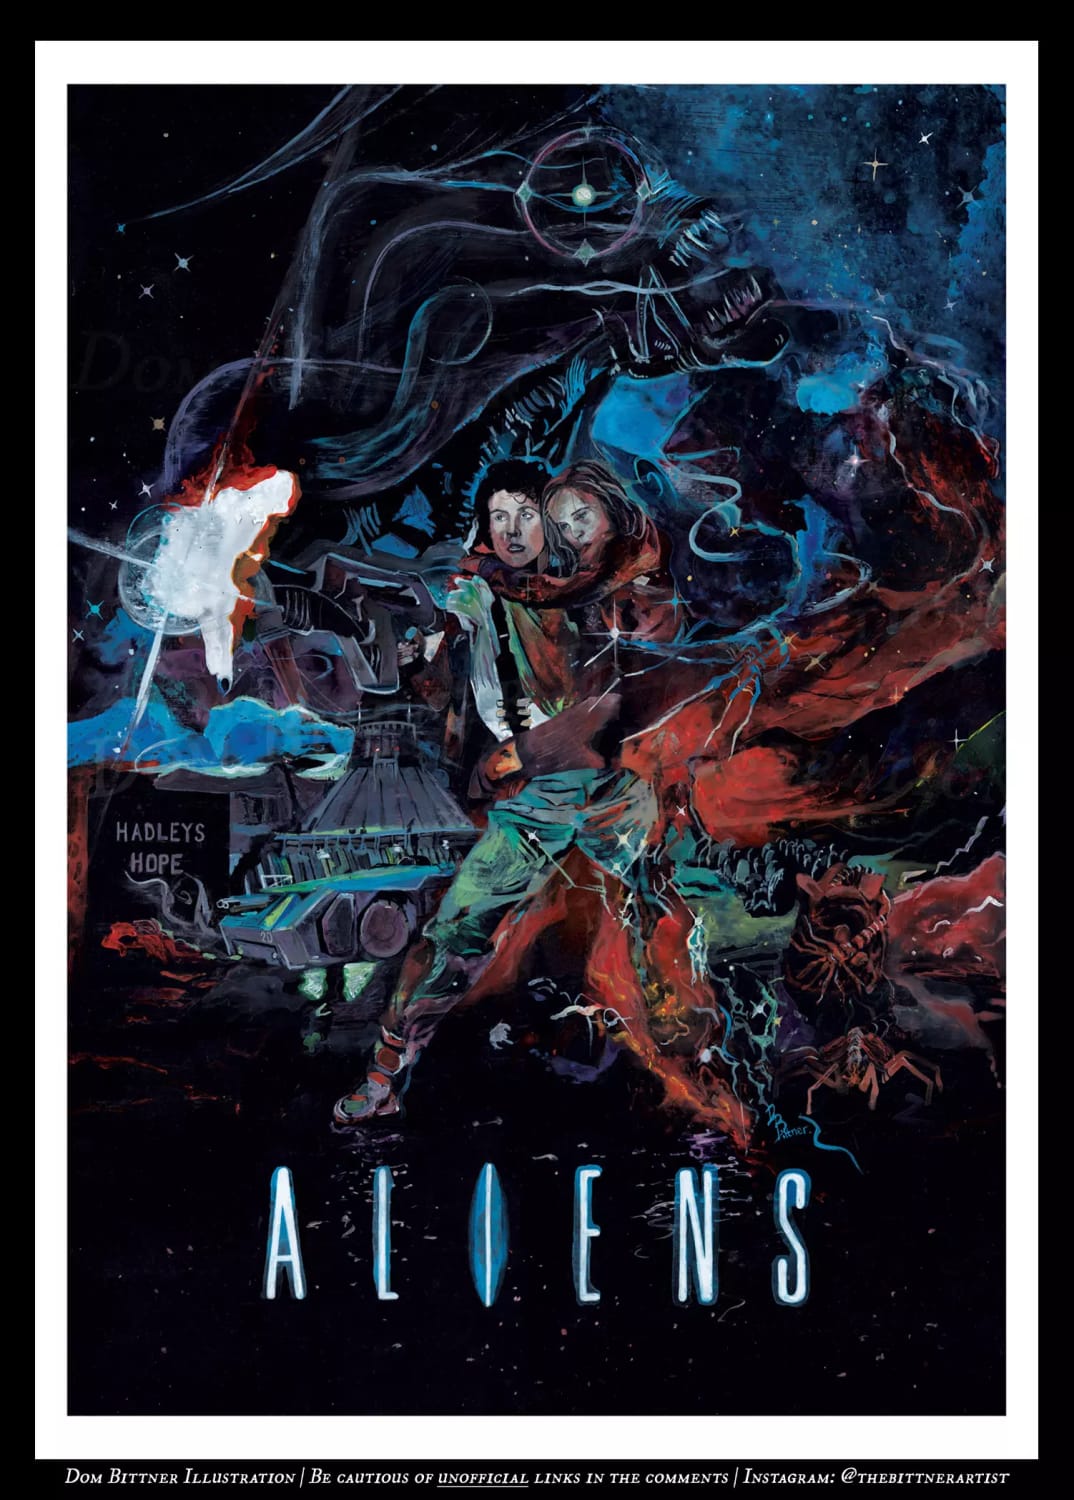 I've finished painting an alternative poster for Aliens (1986).